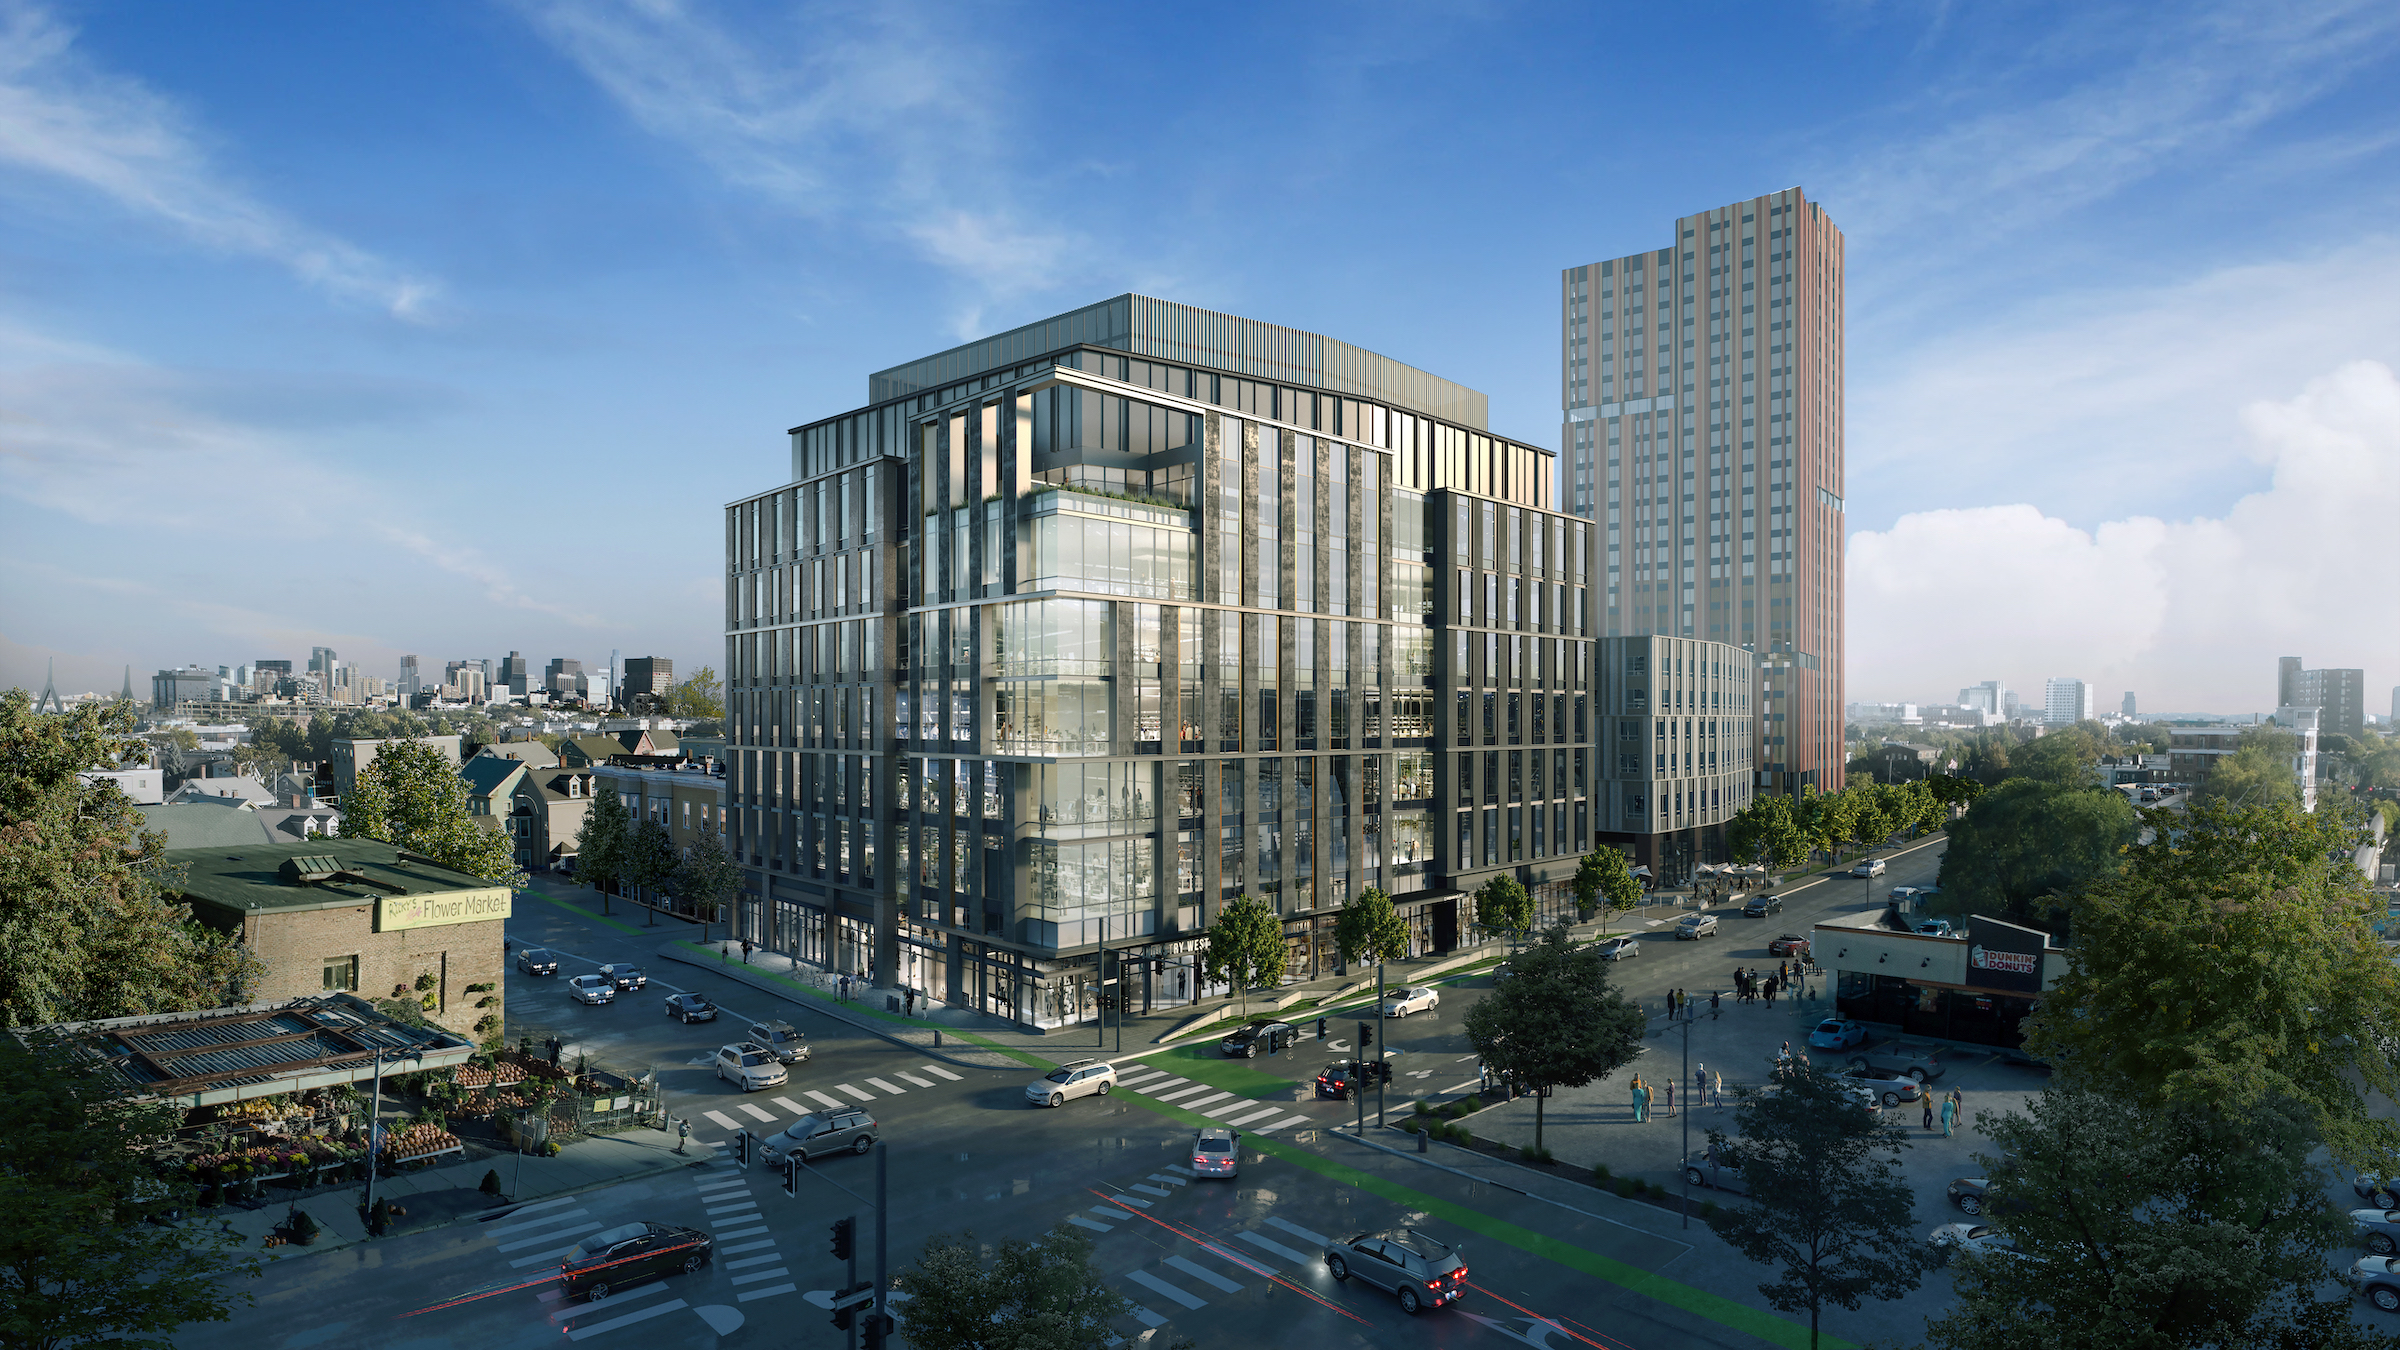 Life sciences lab trends for 2022 Union Square Rendering Courtesy of SGA